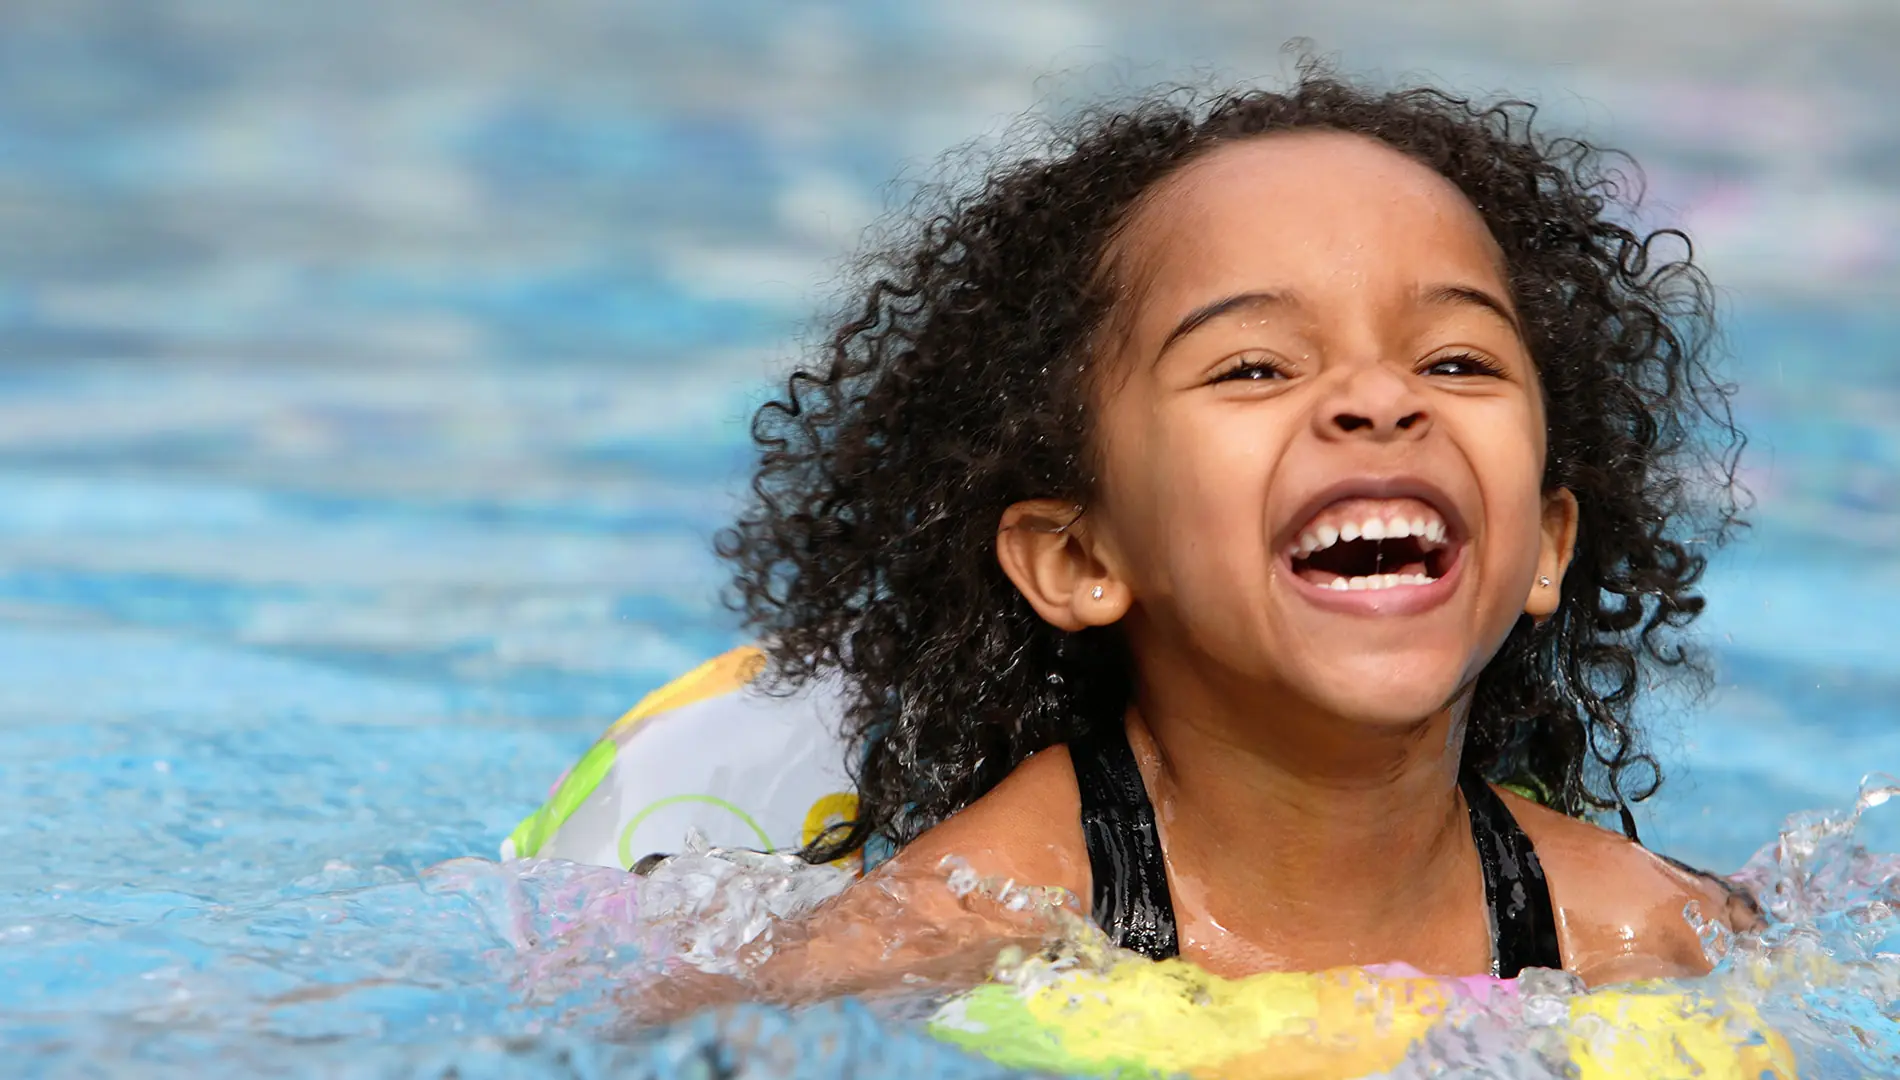 Child smiling as she swims in a pool